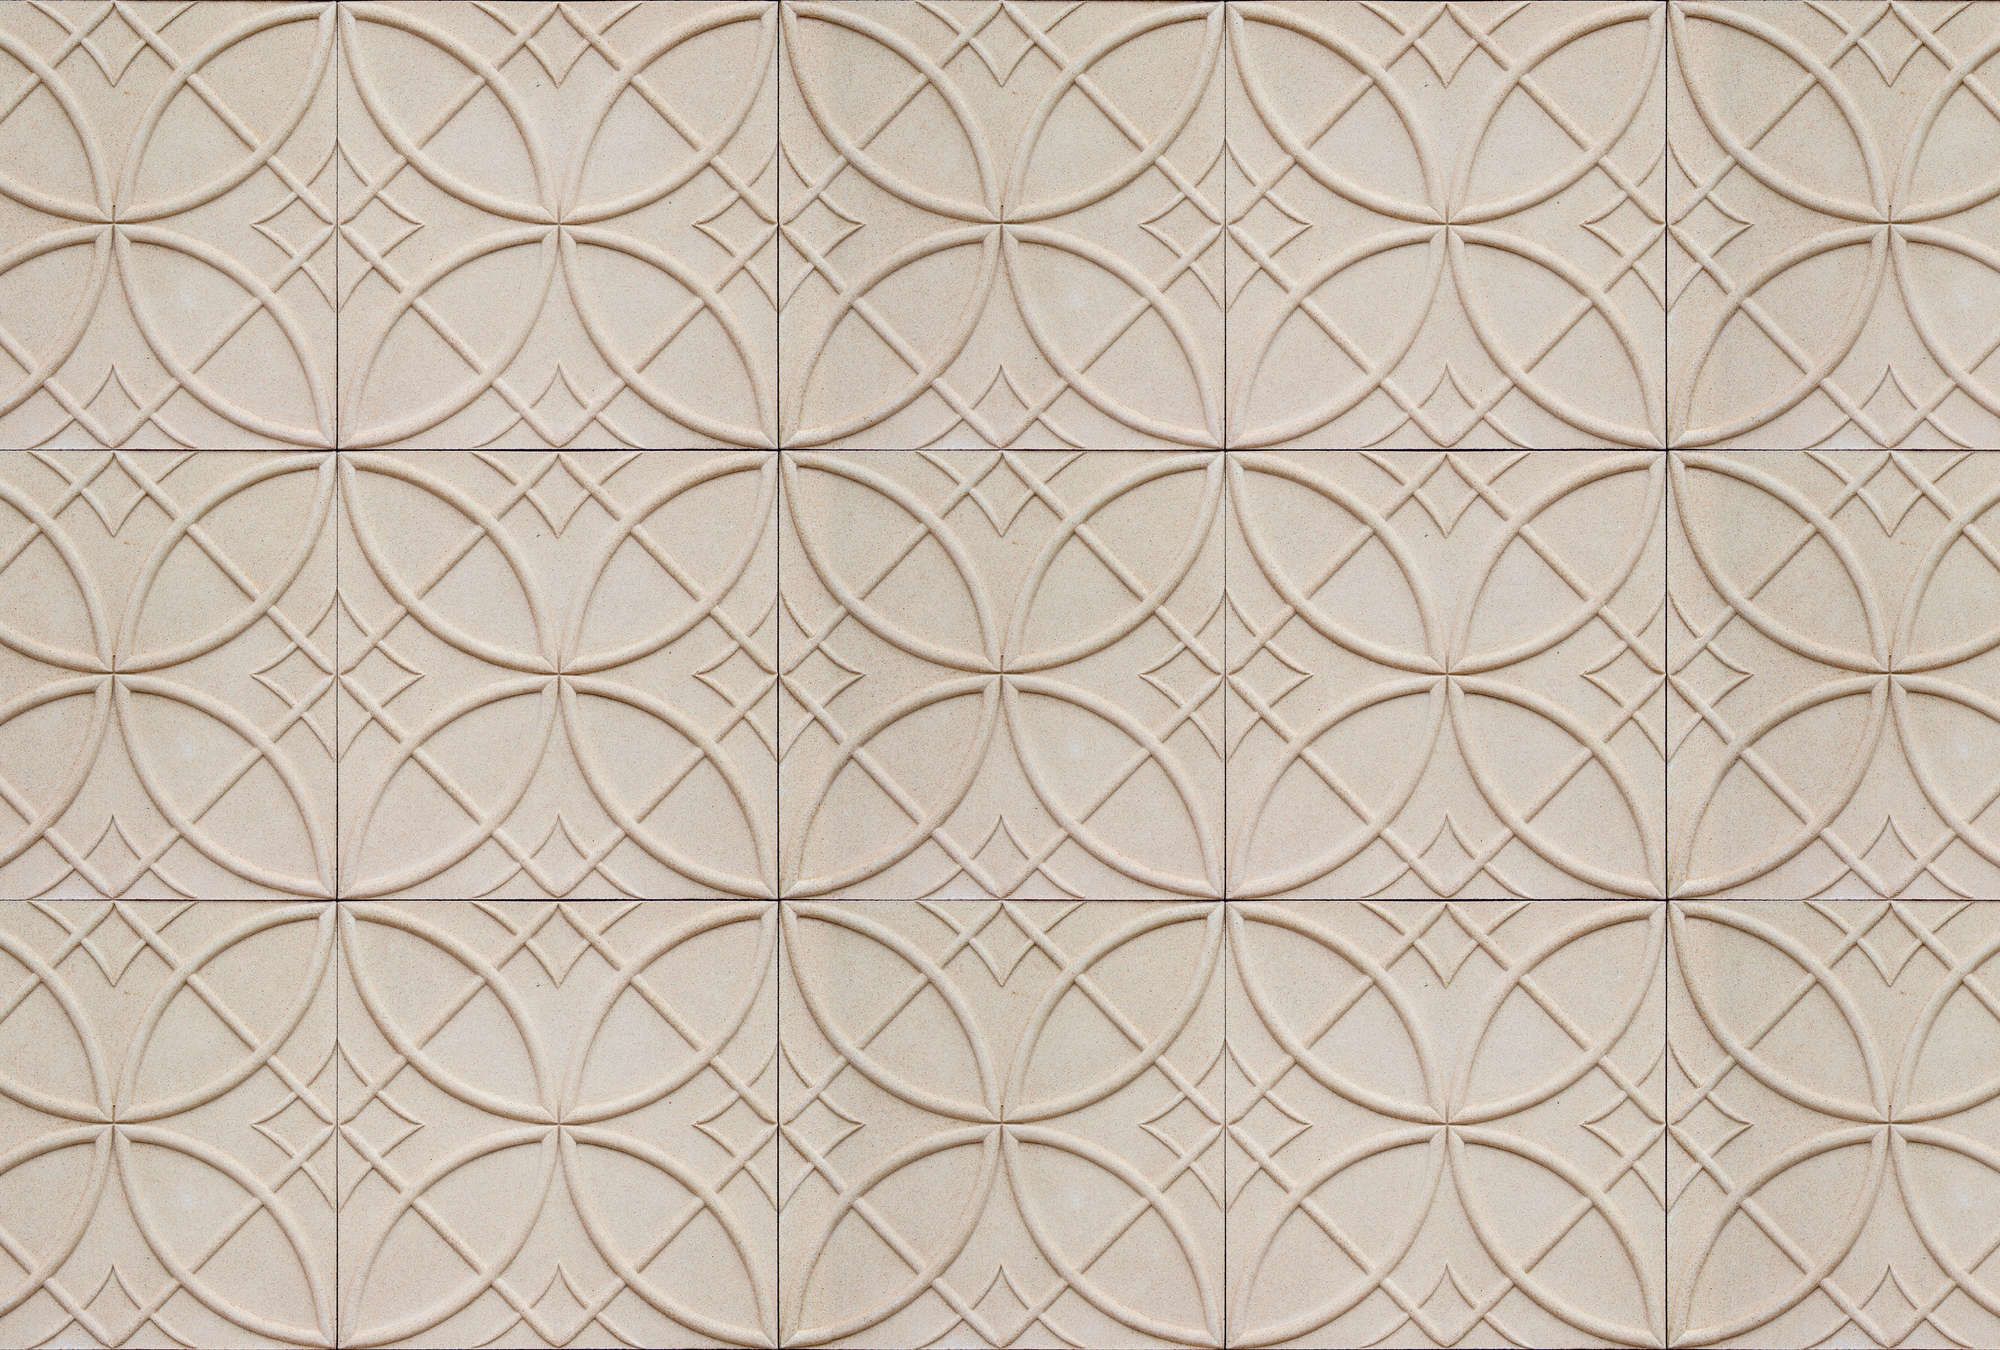             Photo wallpaper »circulus« - Circular pattern on tile look with 3D effect - Smooth, slightly pearlescent non-woven fabric
        